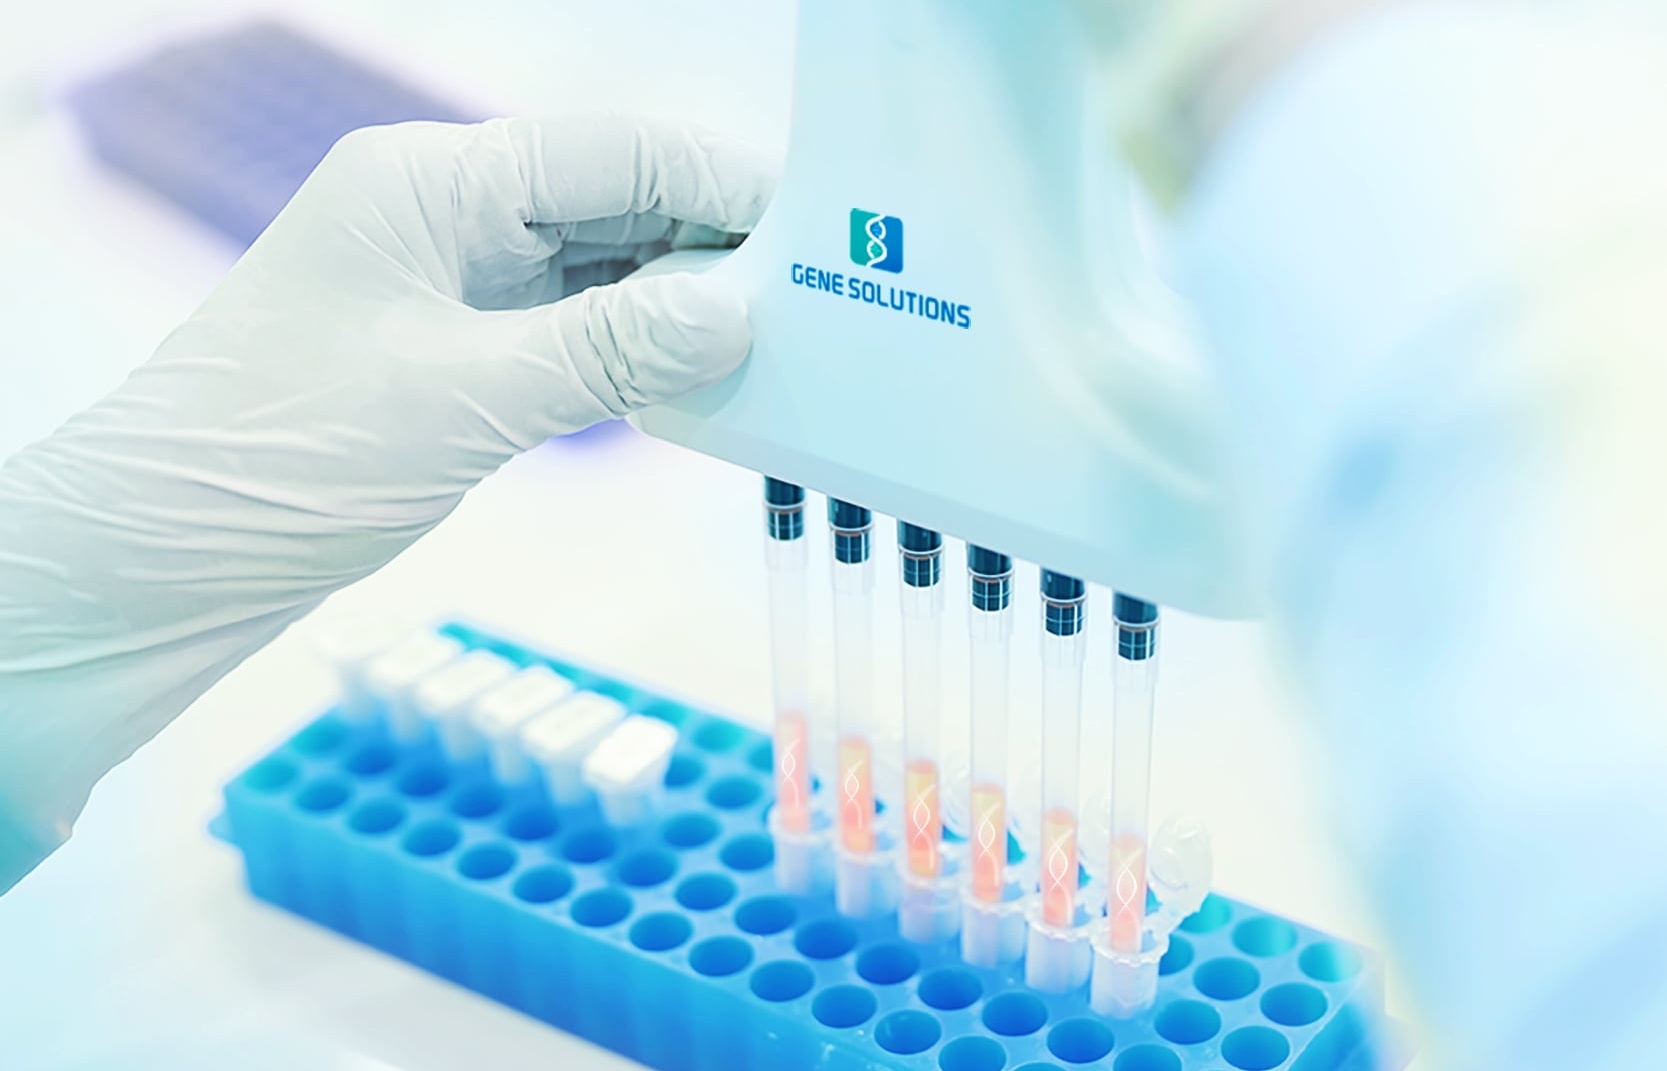 Gene Solutions secures $15 million from Mekong Capital